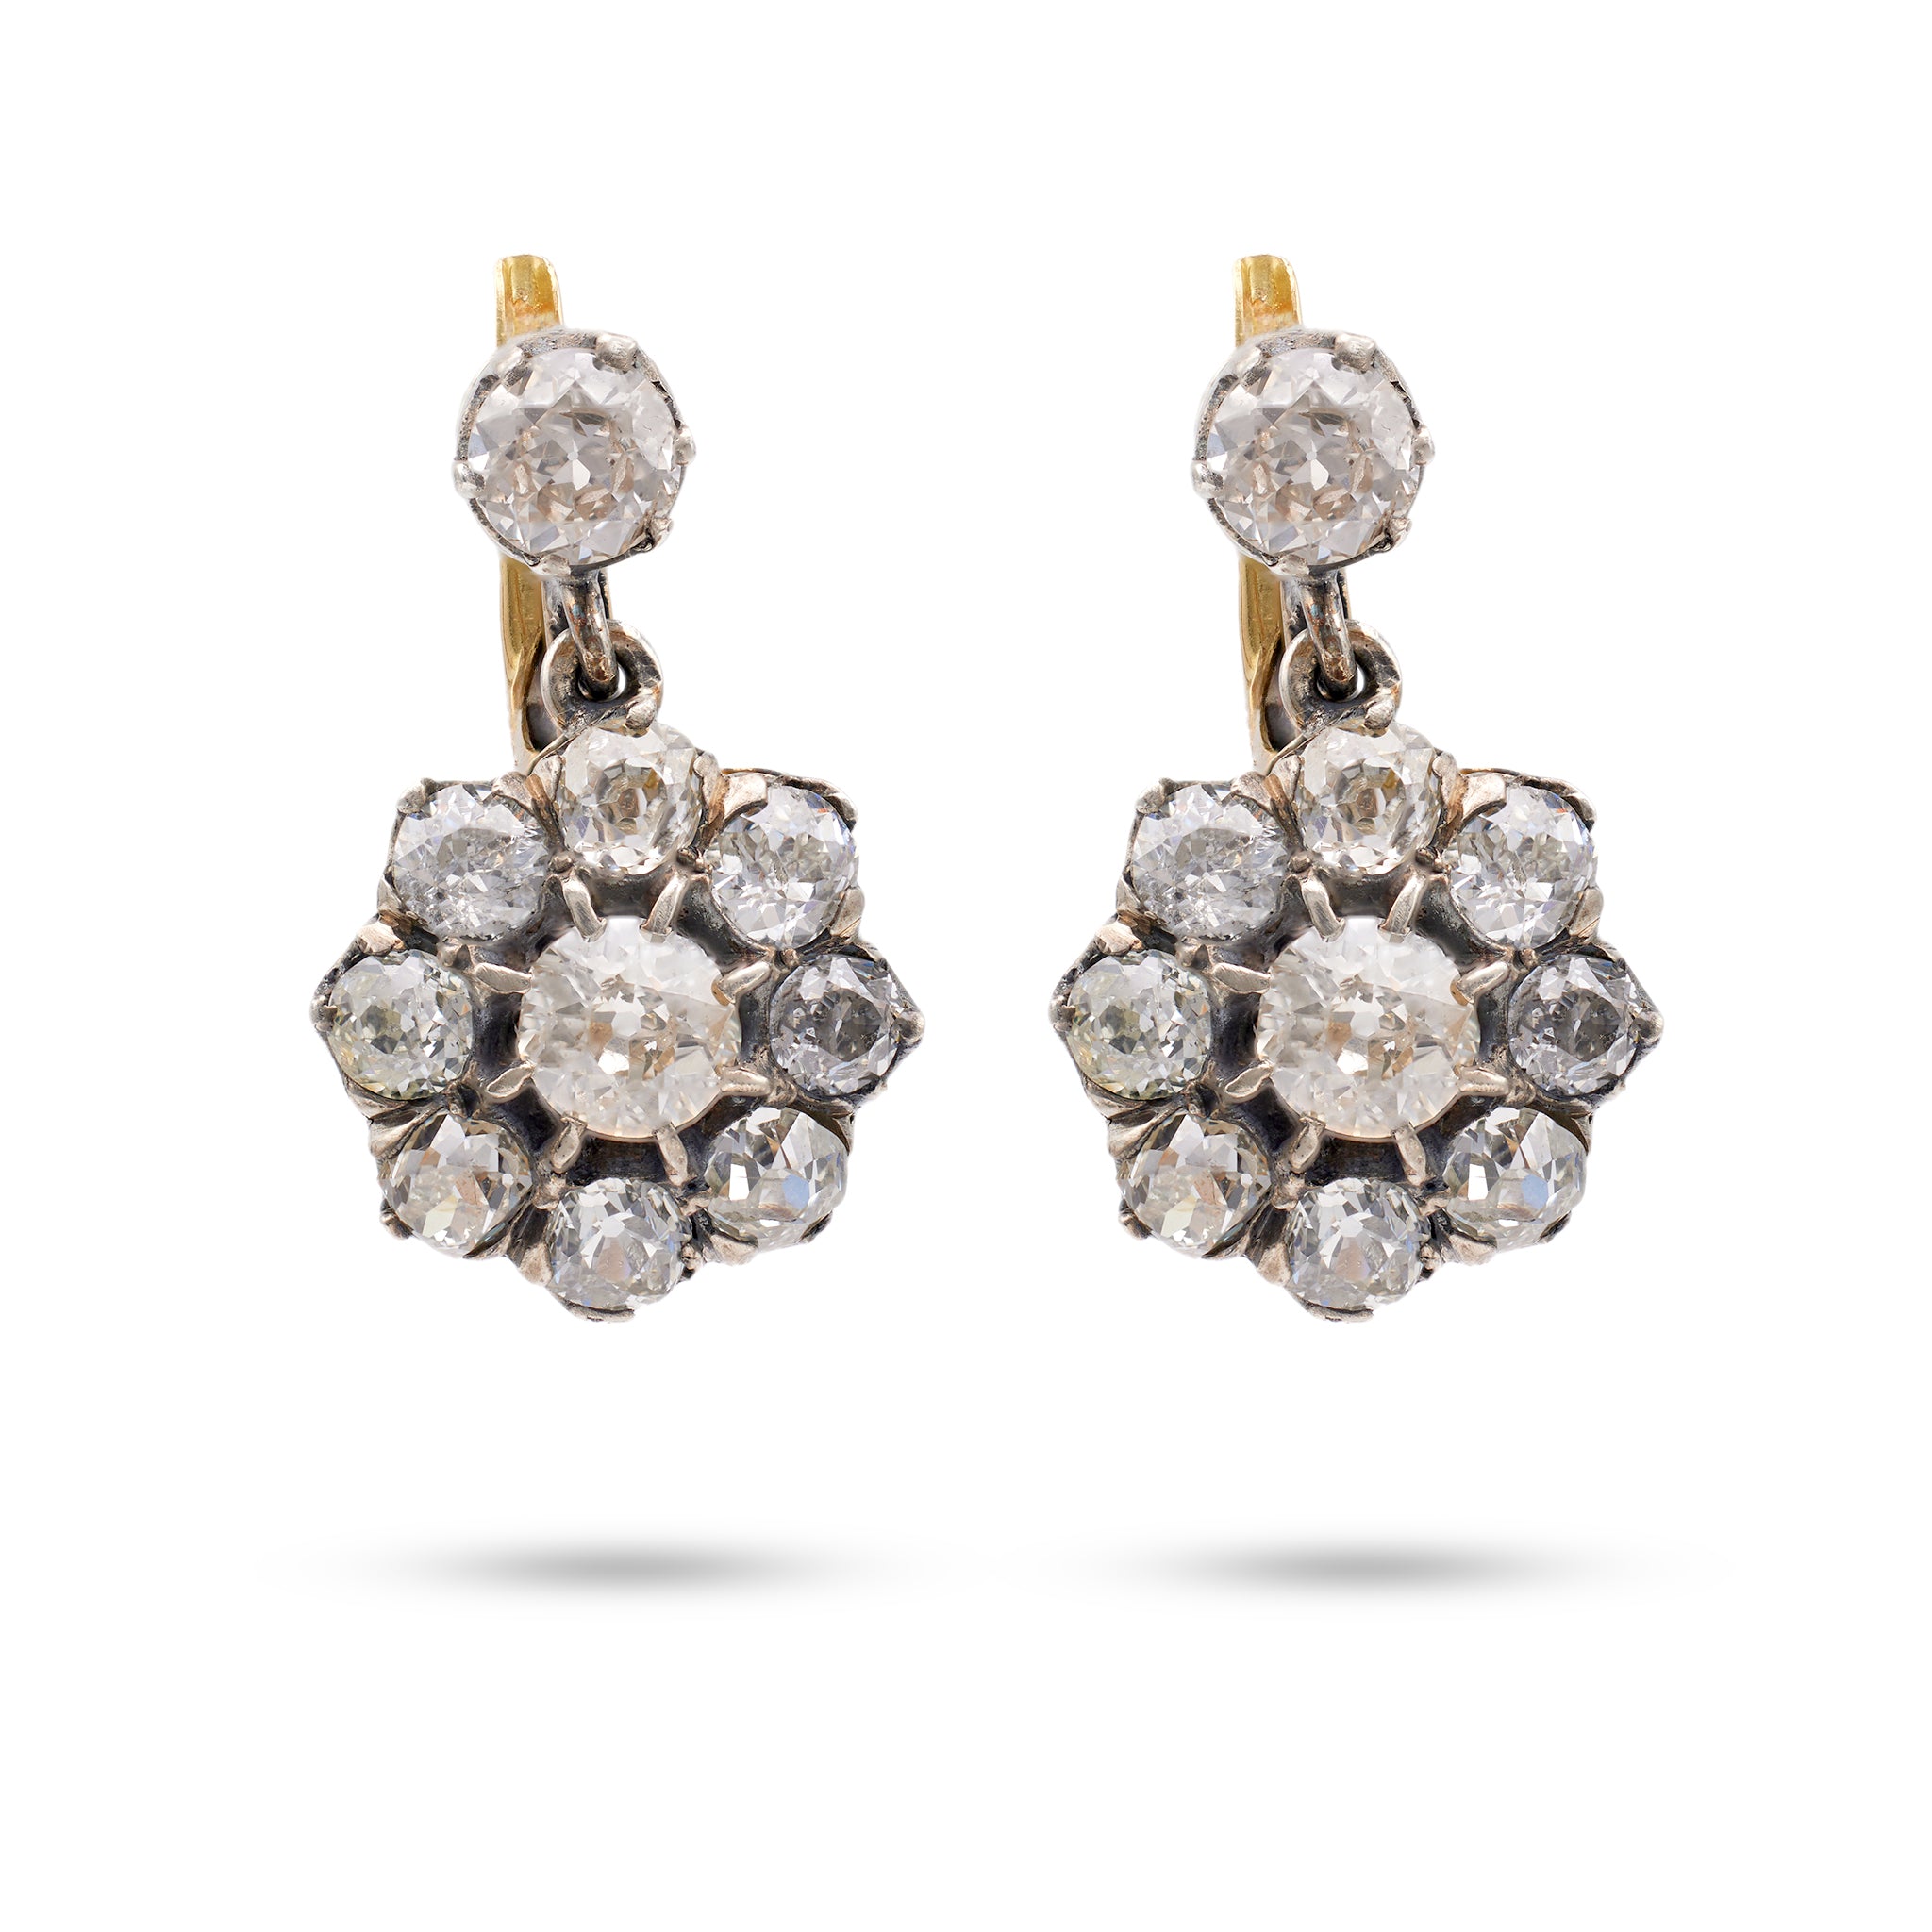 Antique Inspired Diamond 18k Yellow Gold Silver Cluster Earrings